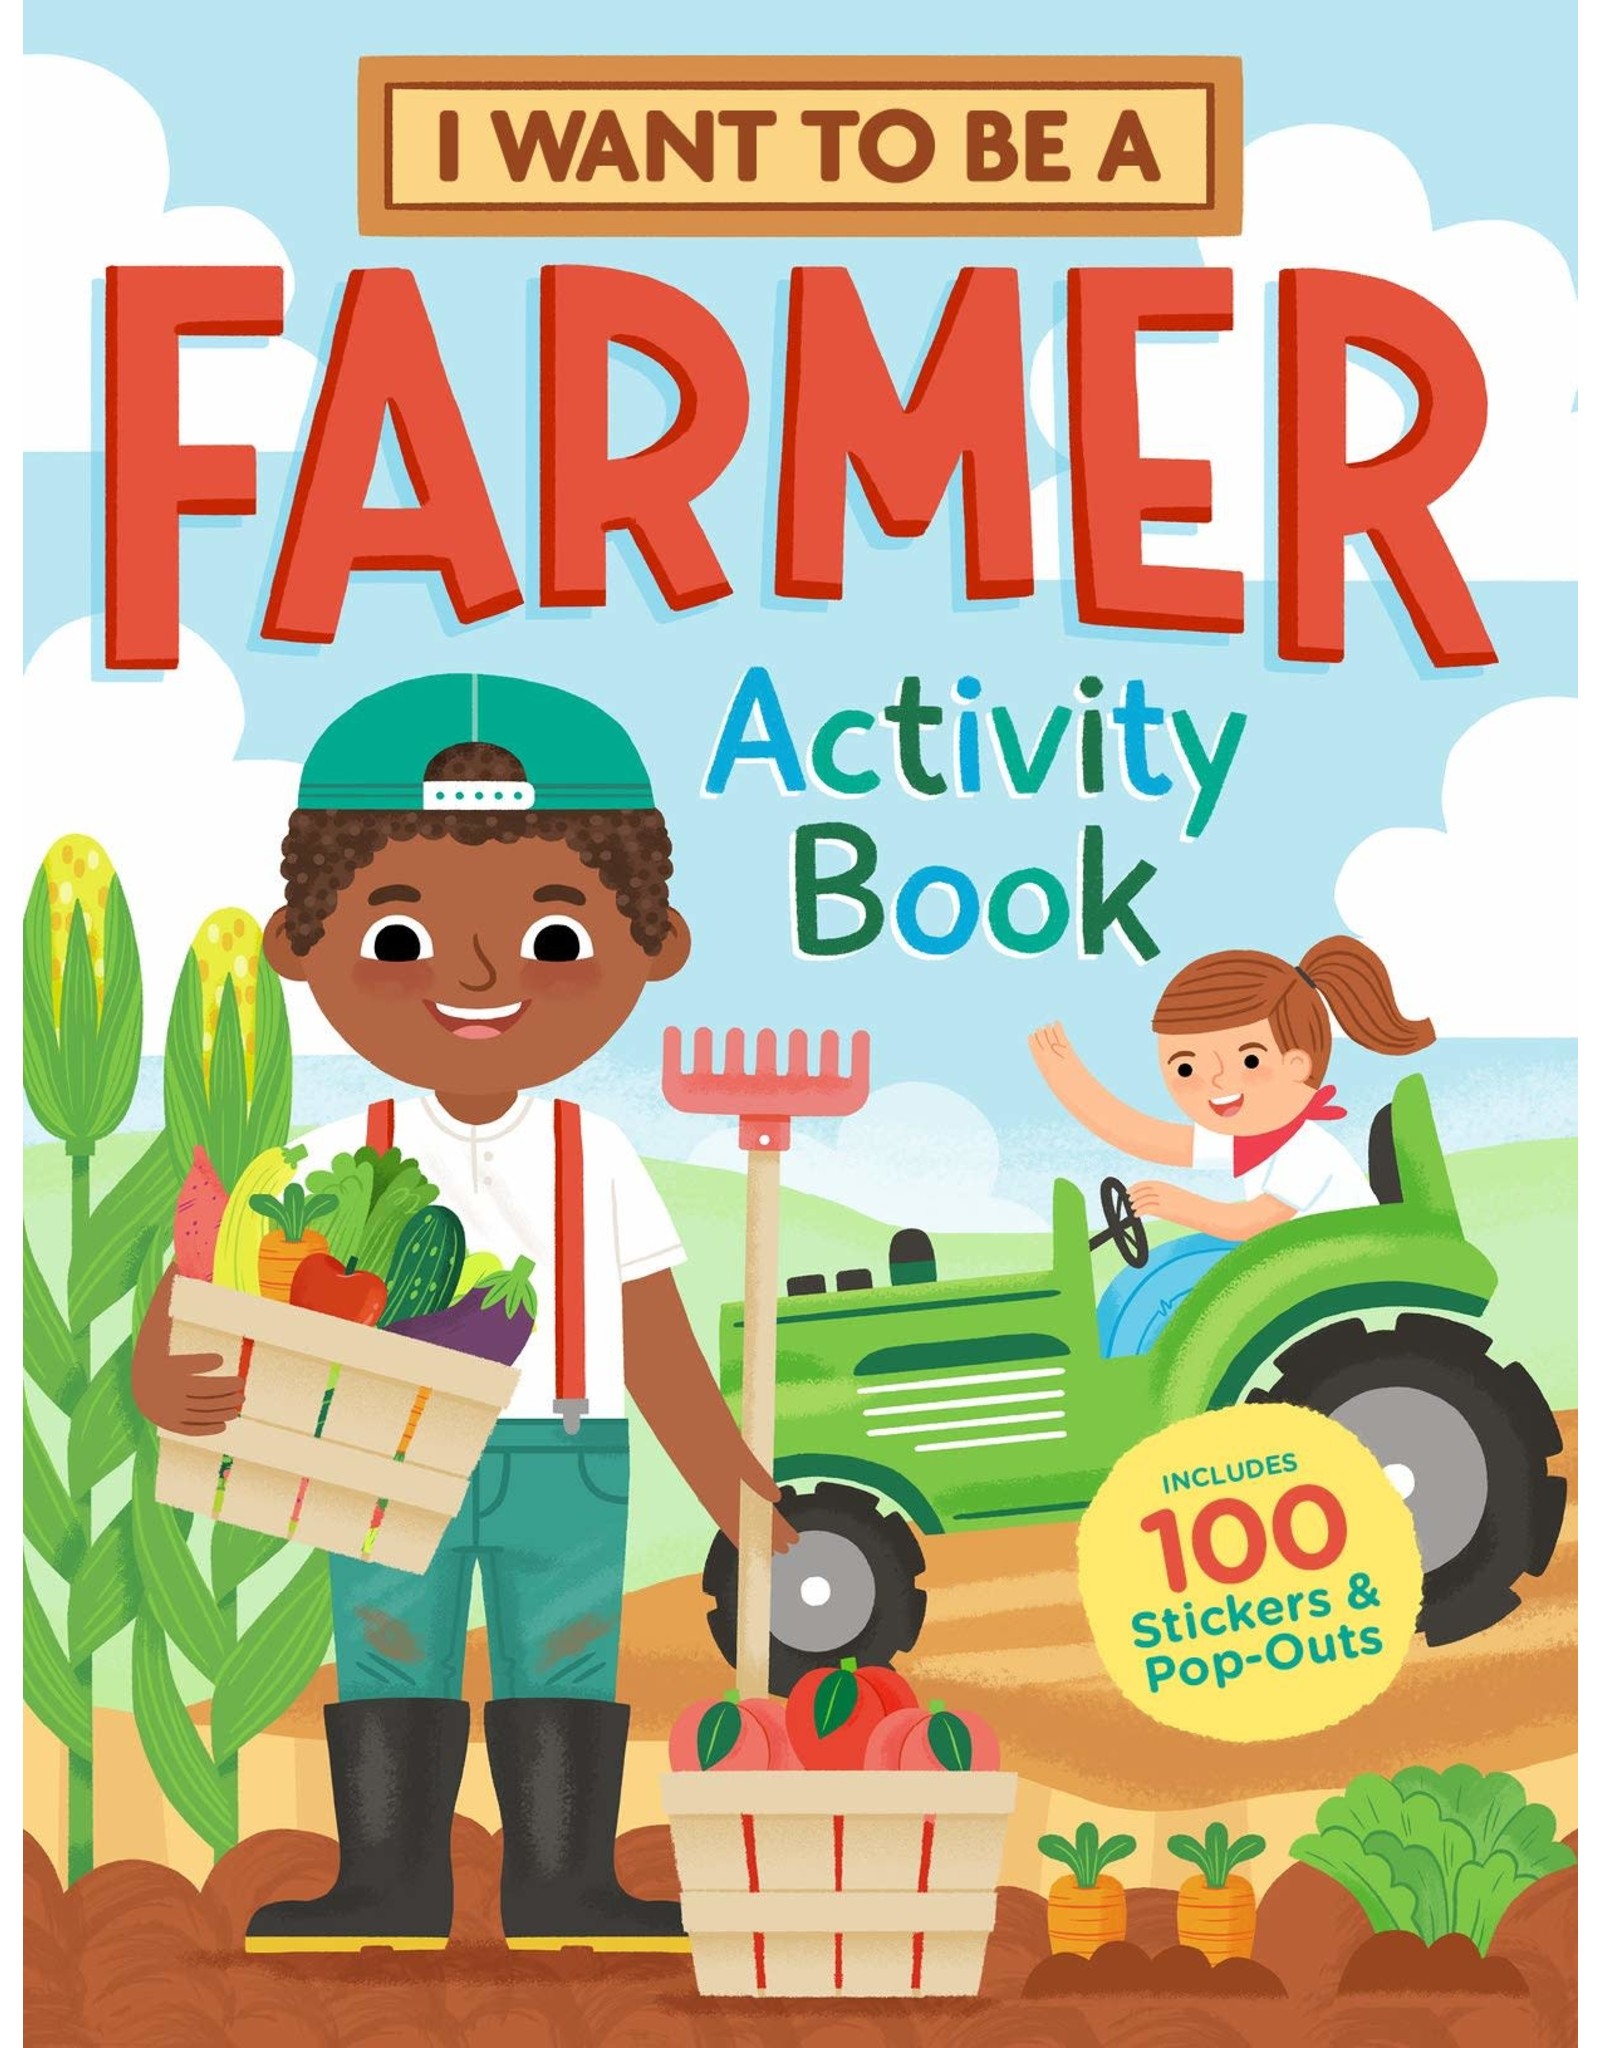 I Want To Be A Farmer Activity Book